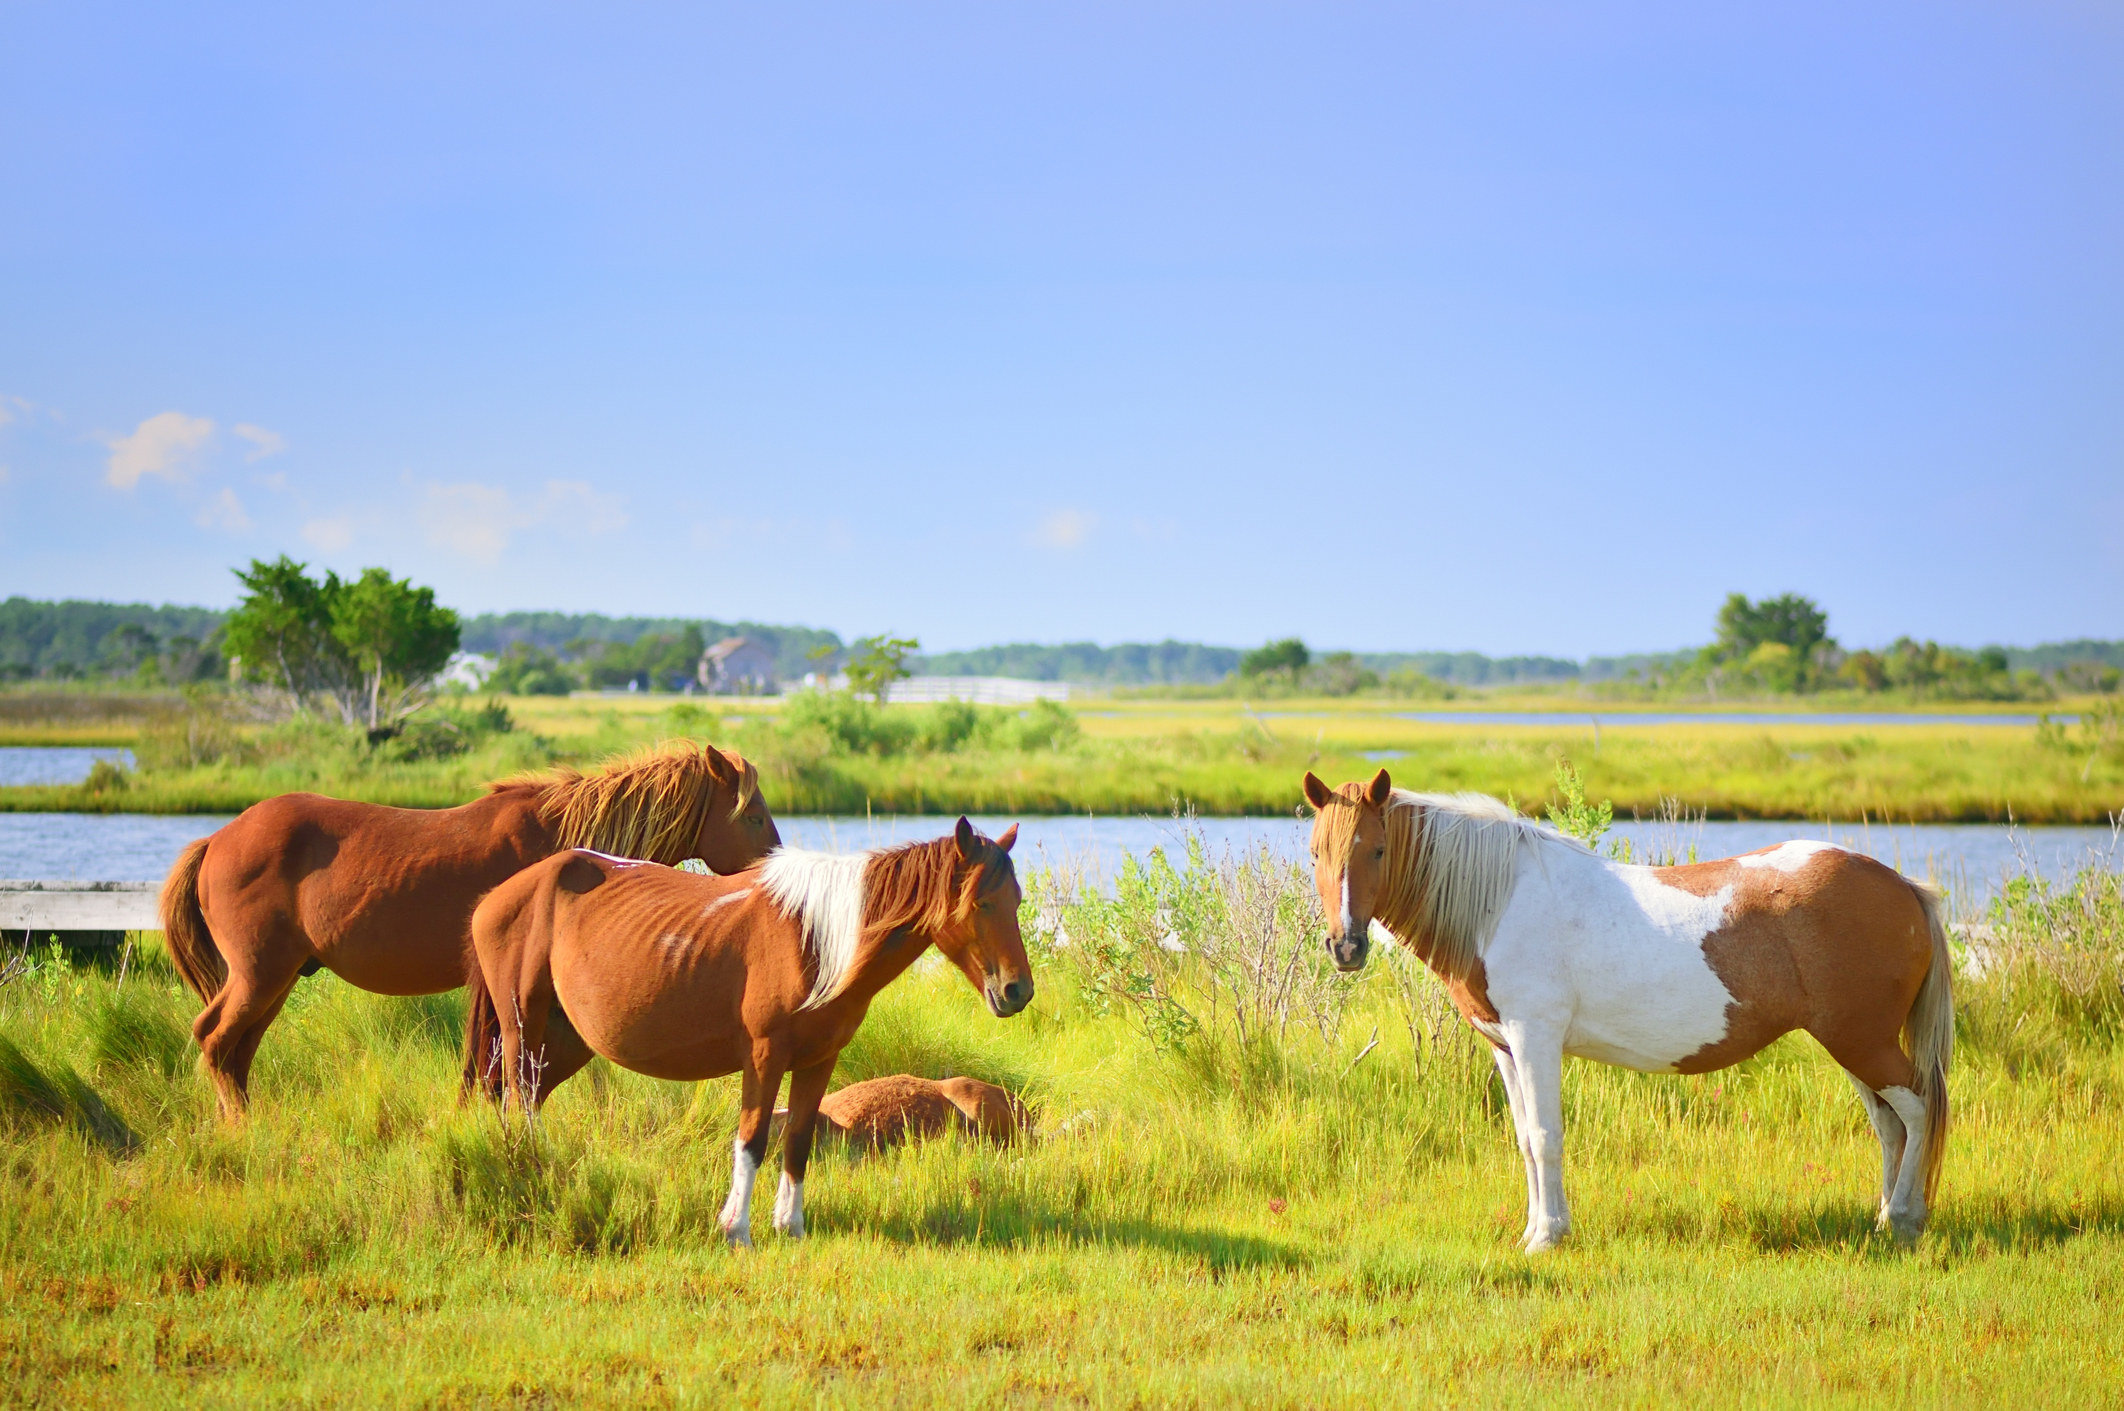 A small group of Assateague Ponies grazing on marsh grasses.